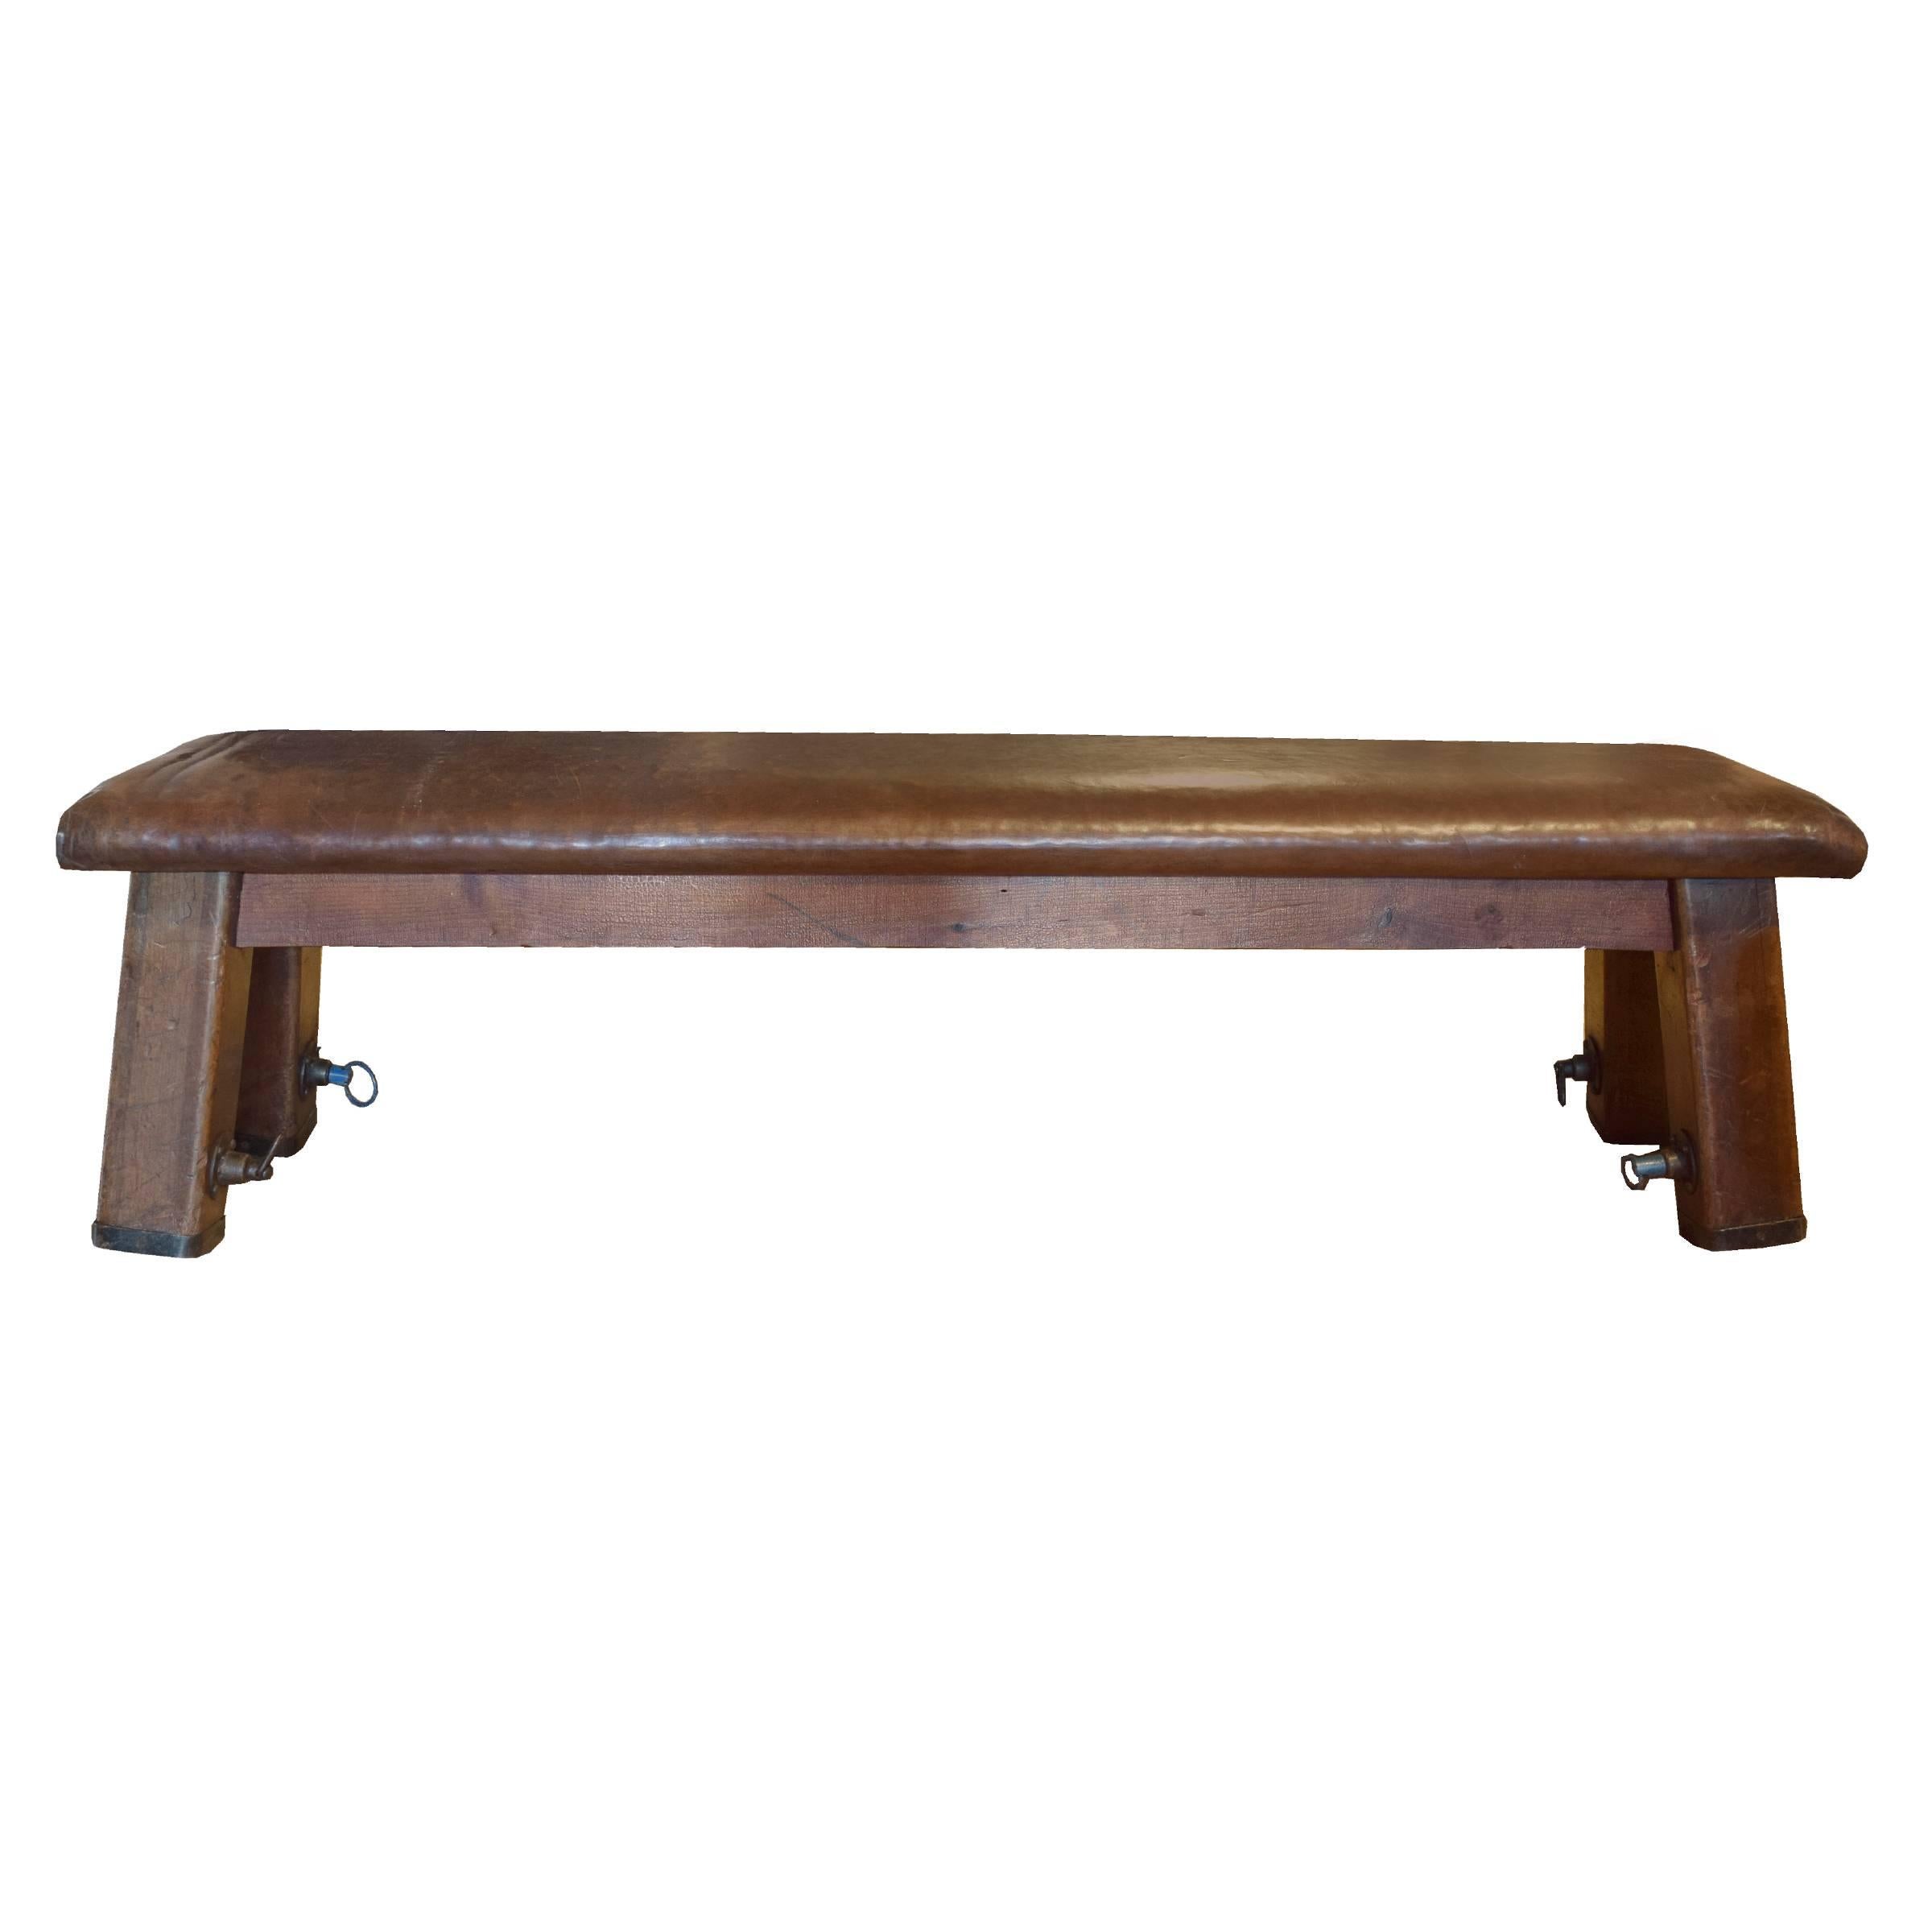 Leather Vaulting Bench